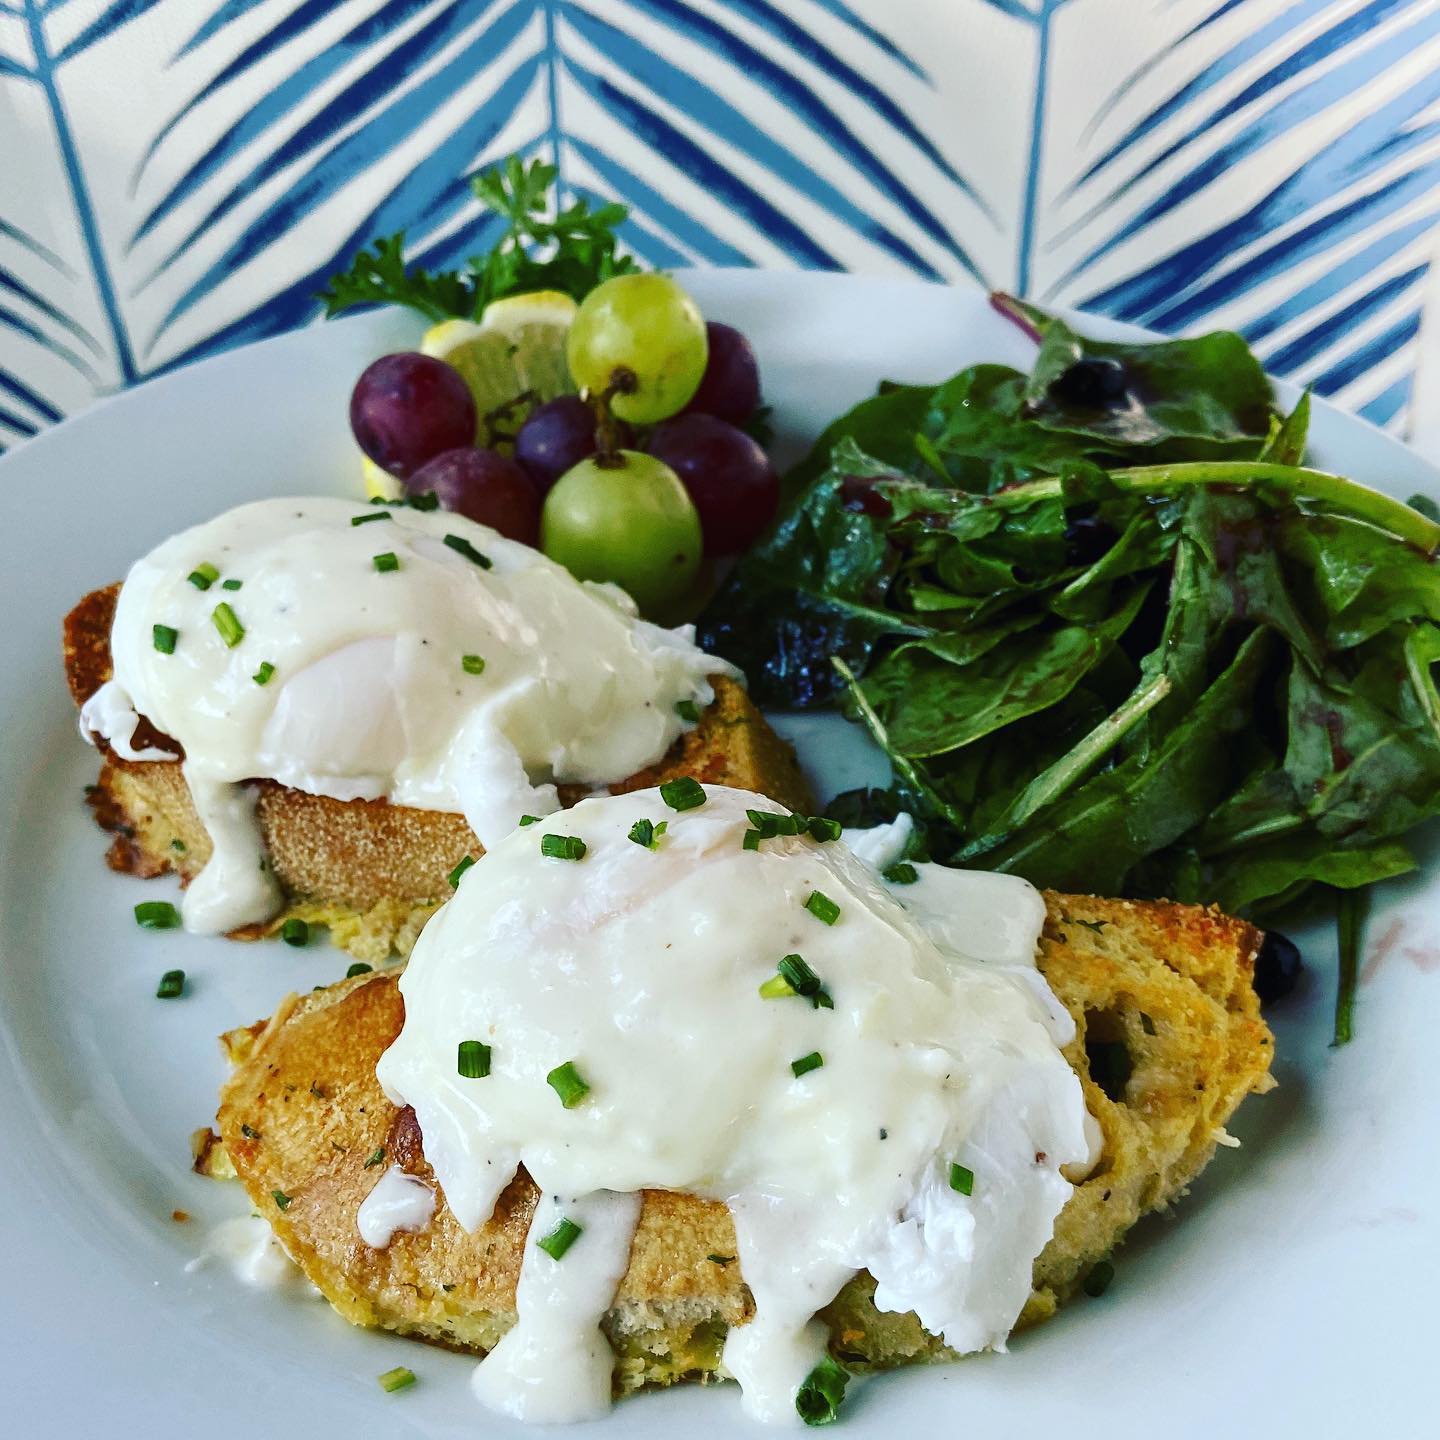 Parmesan “French toast” with poached eggs w Mornay and blueberry dressed greens.